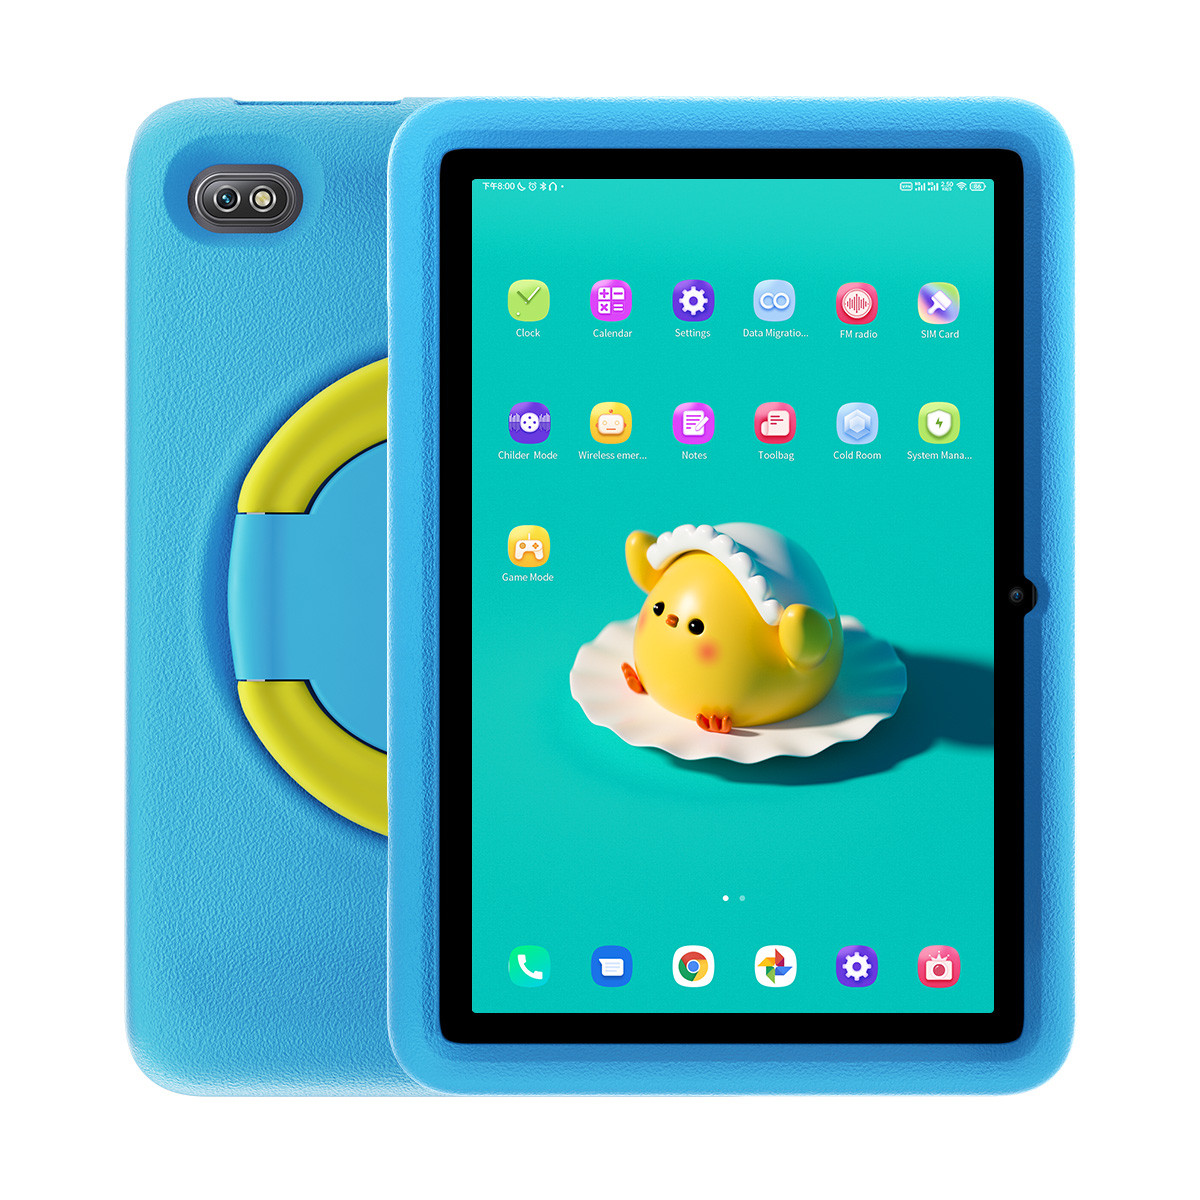 Android tablety